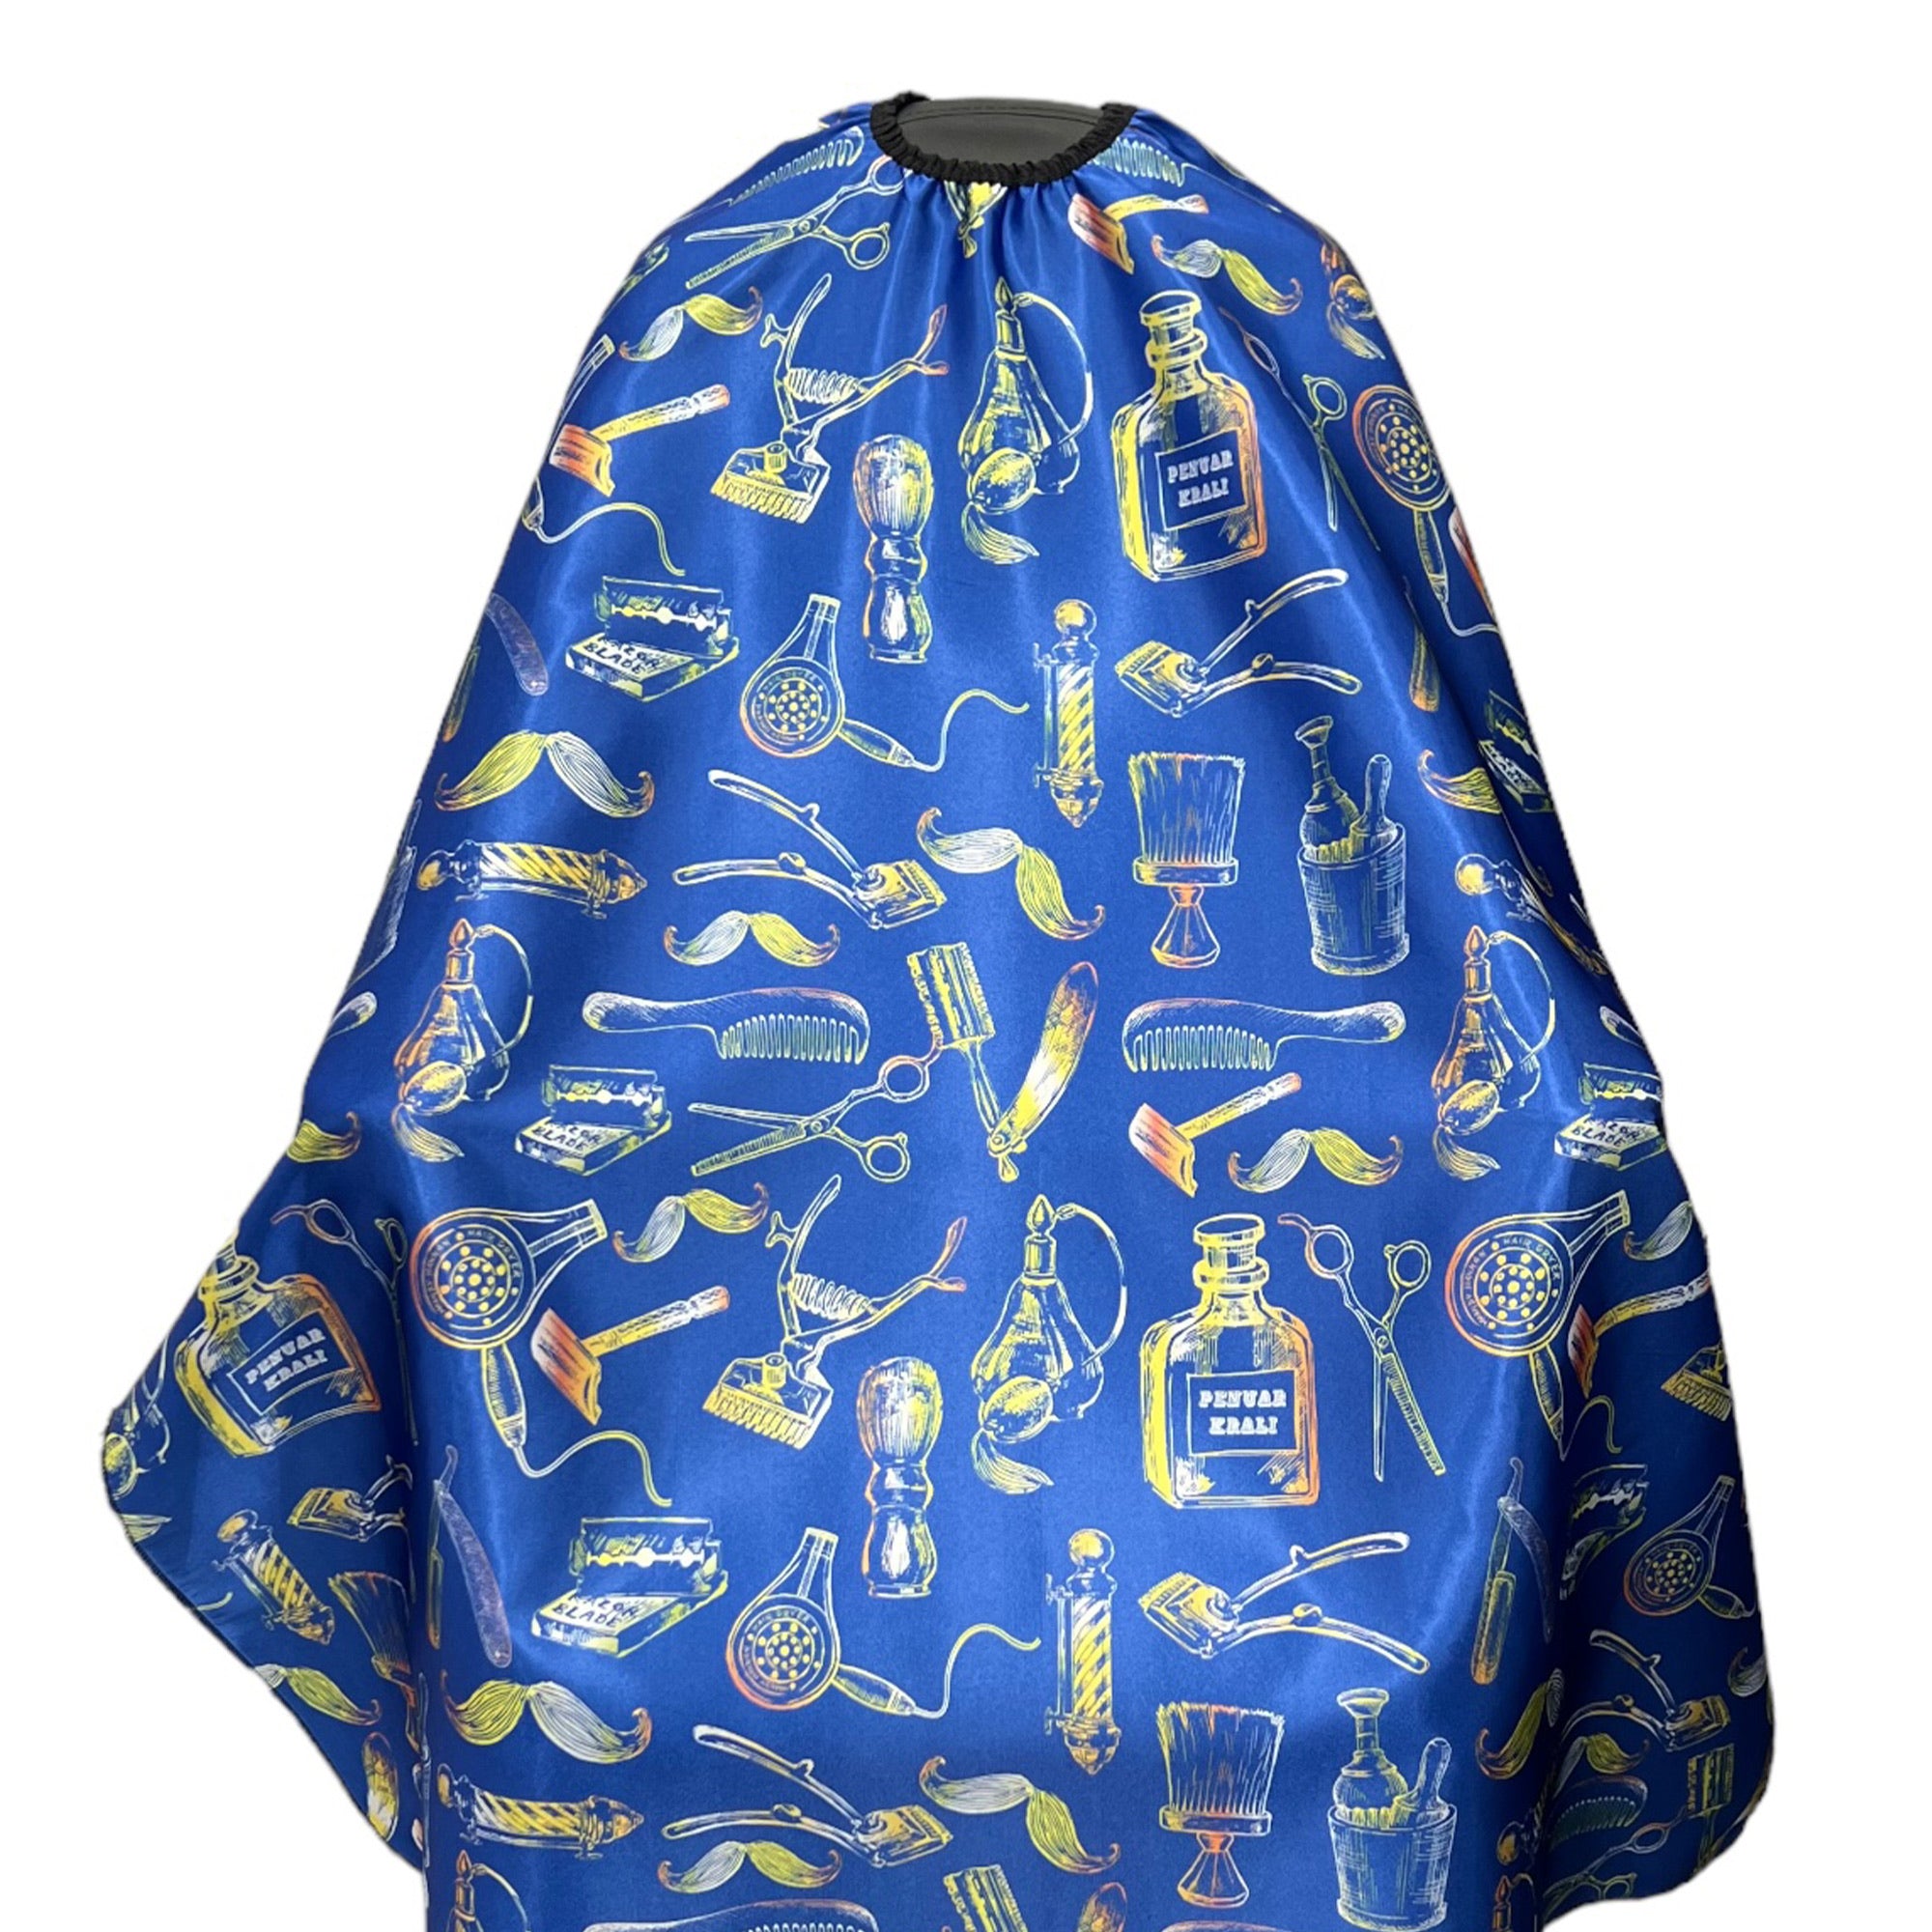 Gabri - Barber Hairdressing Hair Cutting Capes & Gowns Tools Pattern (Blue)